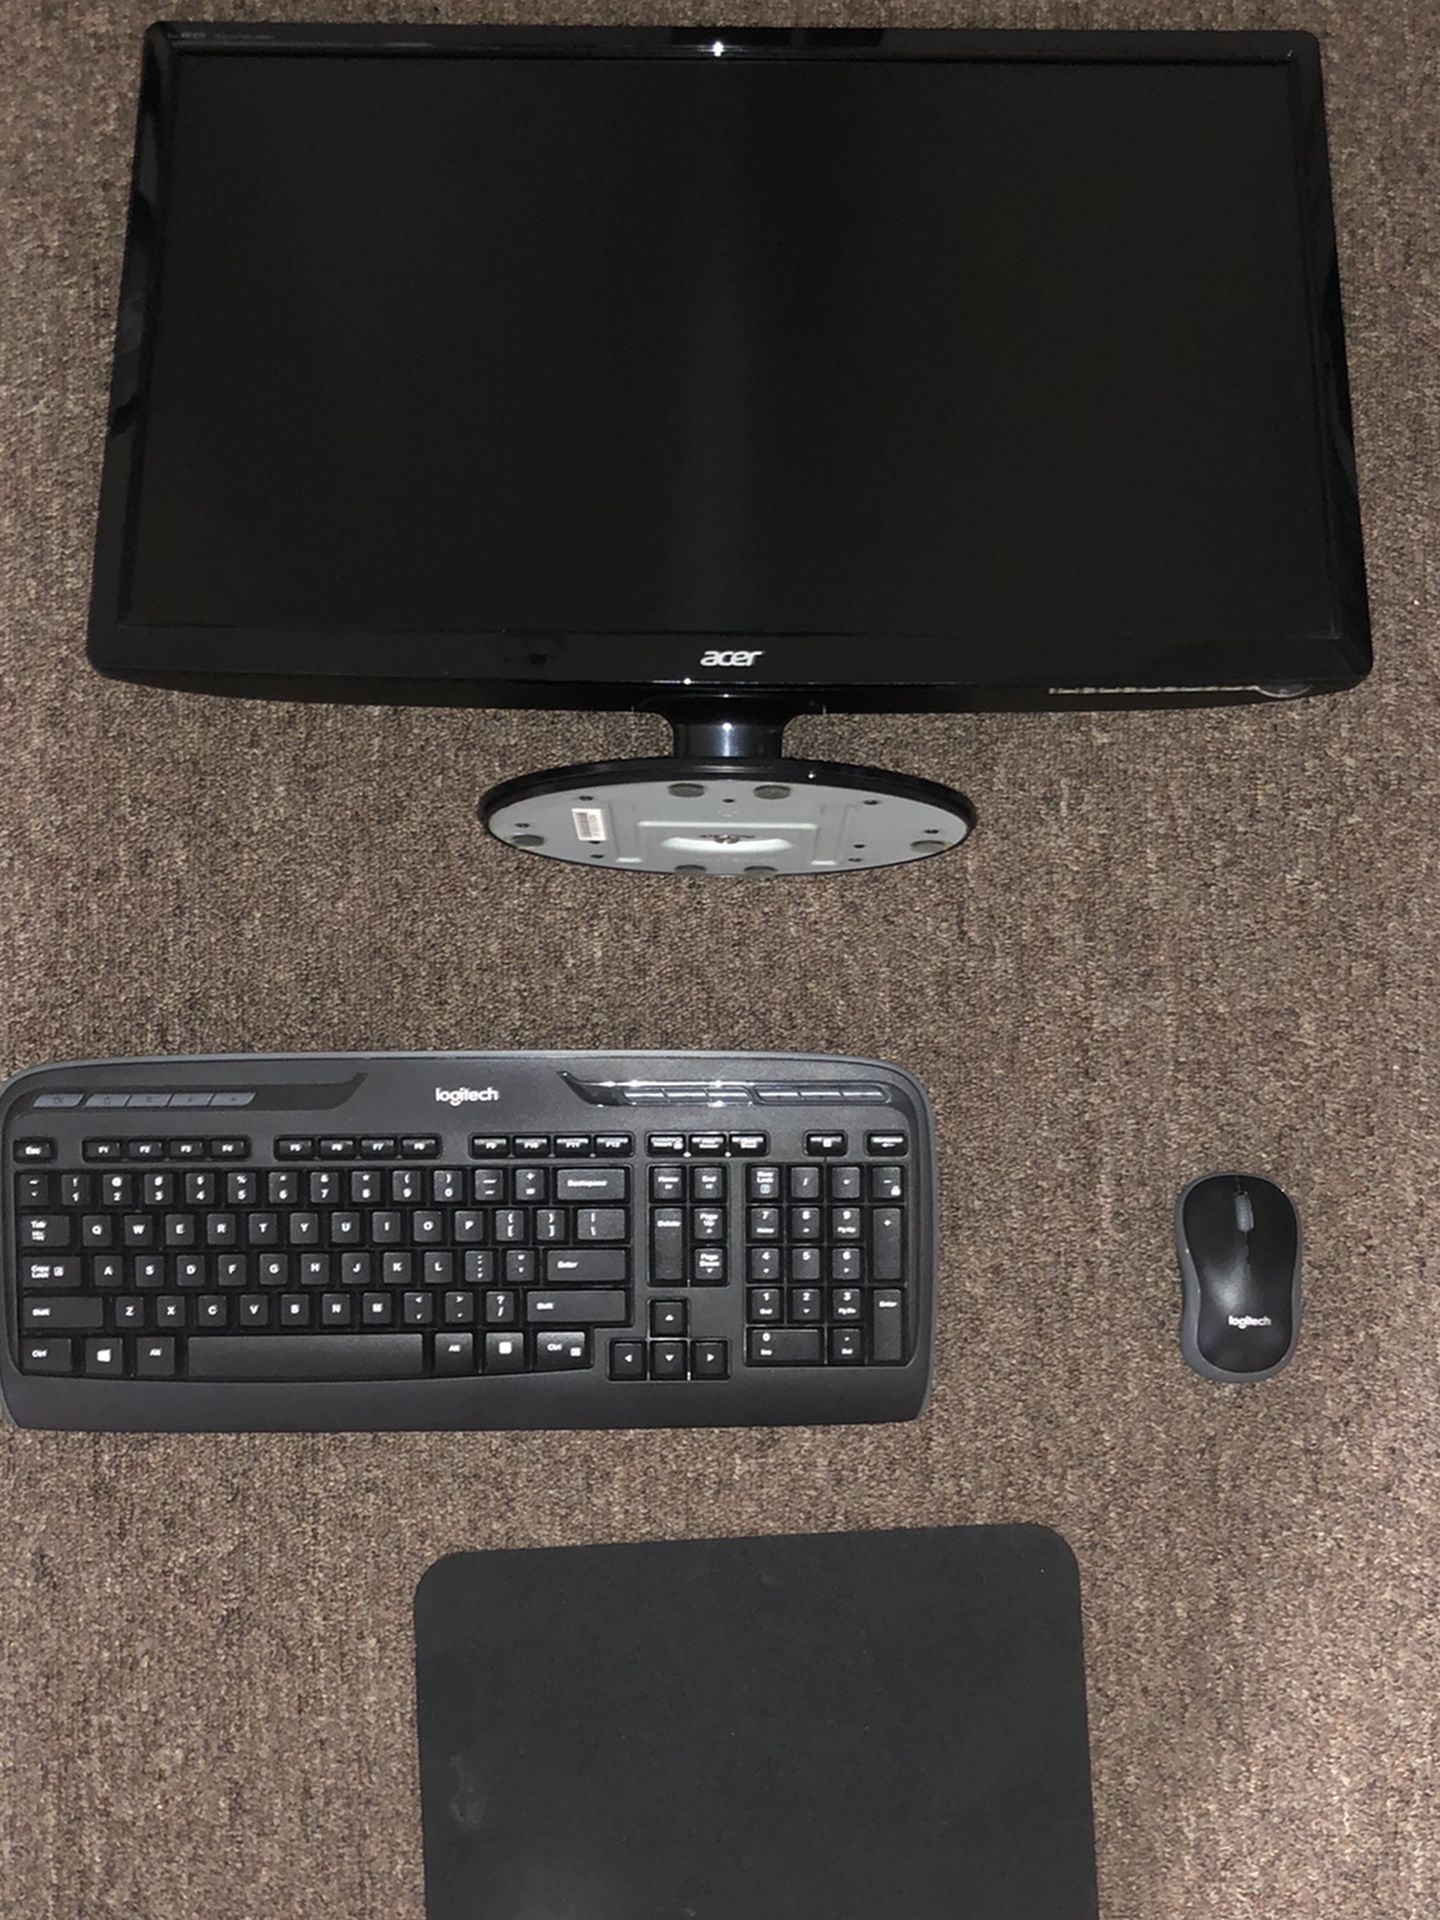 Samsung lCD Monitor 24” With Mouse And Keyboard Logitech Wireless